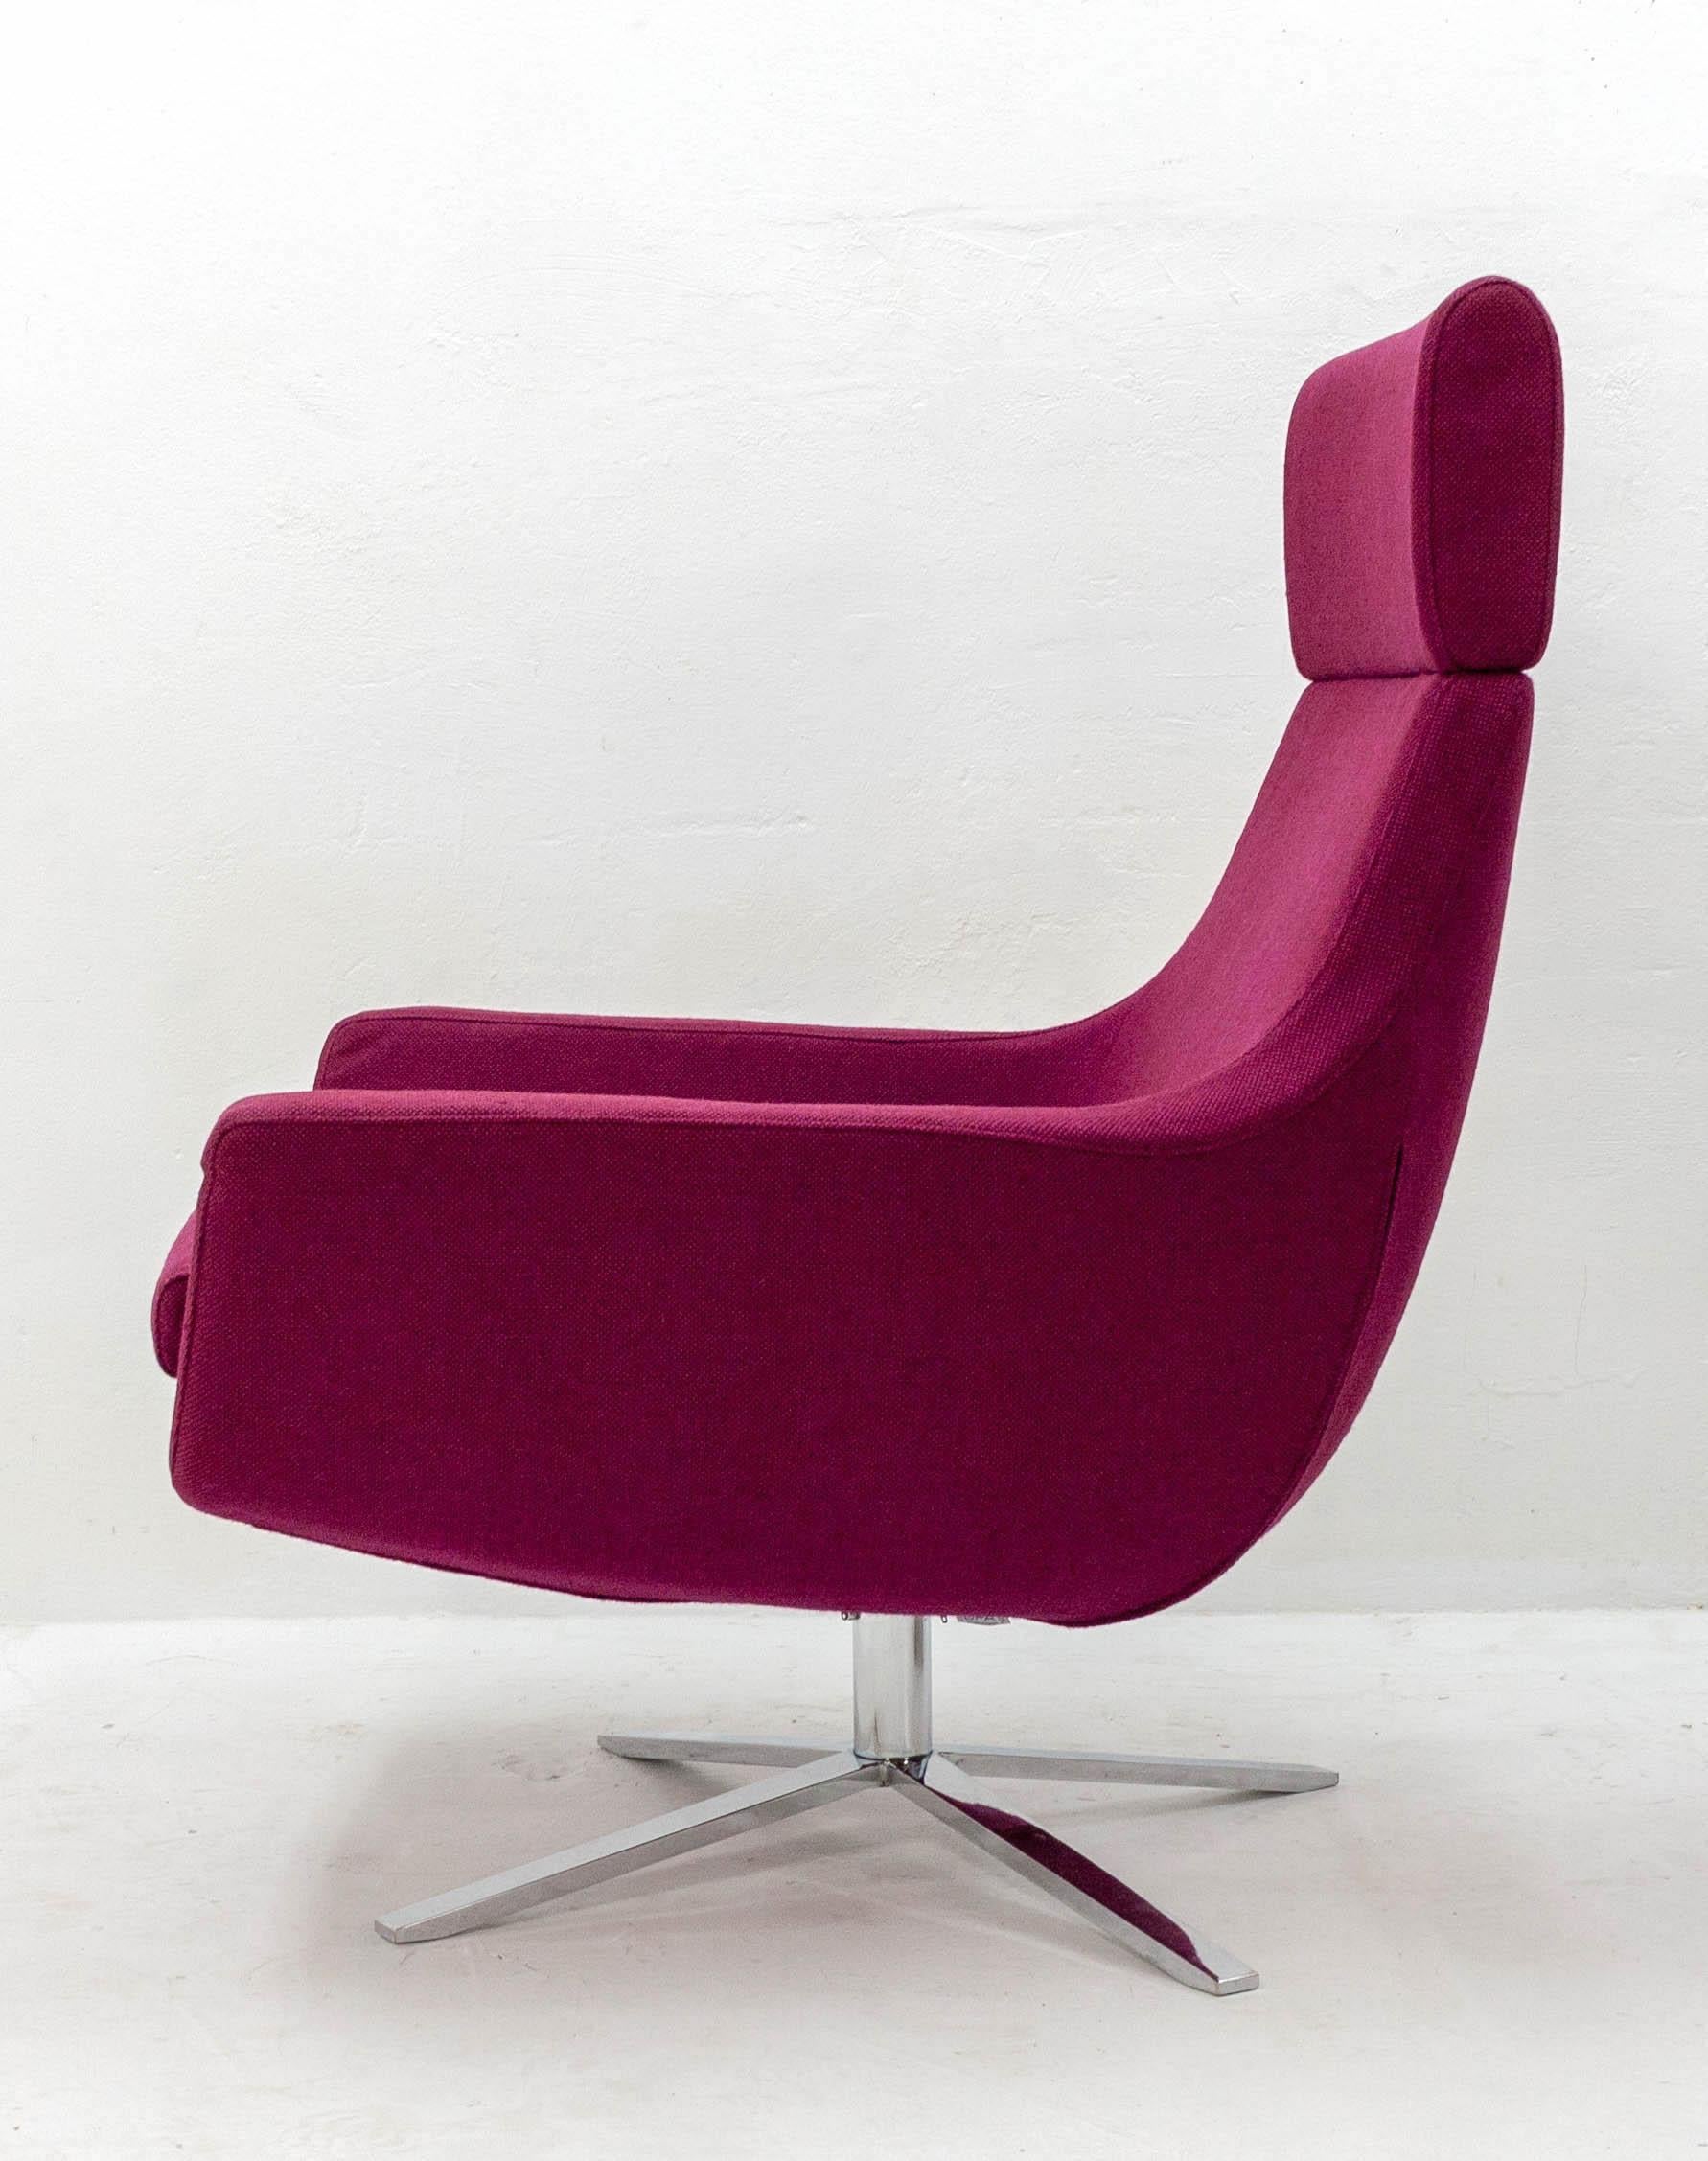 Futuristic lounge chair and matching ottoman from BPA International, Italy. Very exclusive contemporary design by Bob Anderson, this set is upholstered in an eye-catching fuchsia fabric. The chair also swivels on its base.

